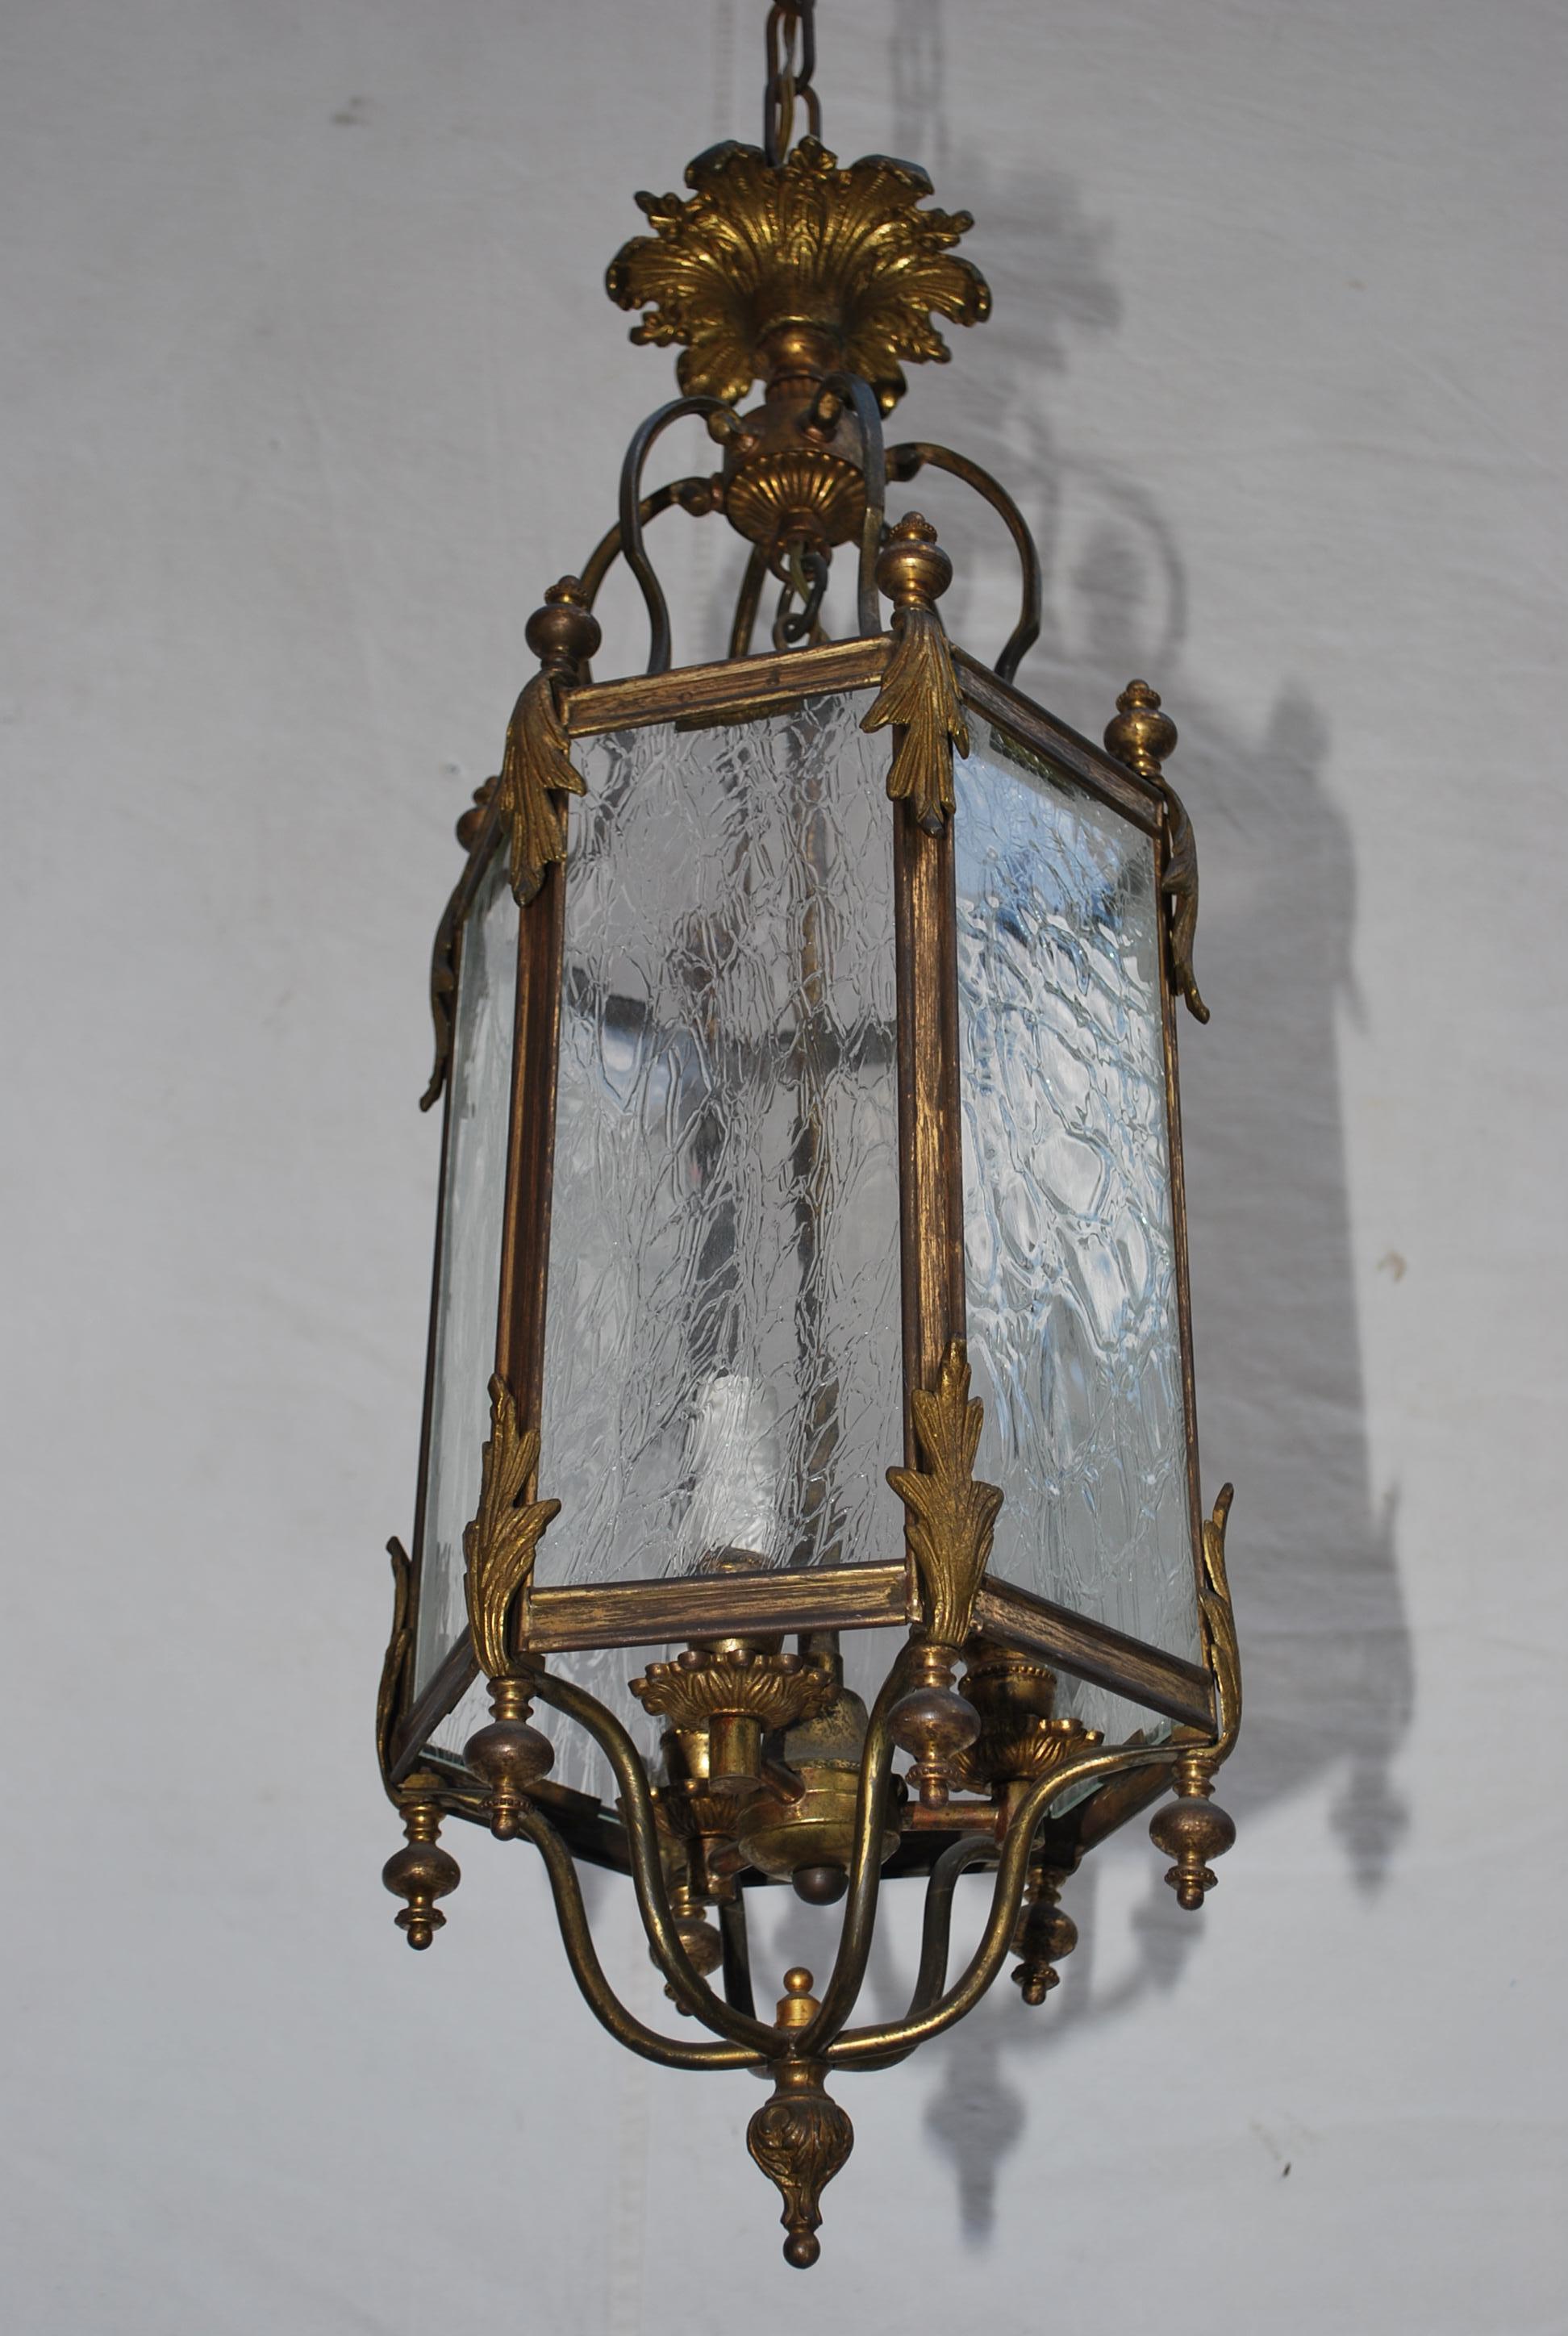 A beautiful 1930's Brass lantern, the patina is so much nicer in person